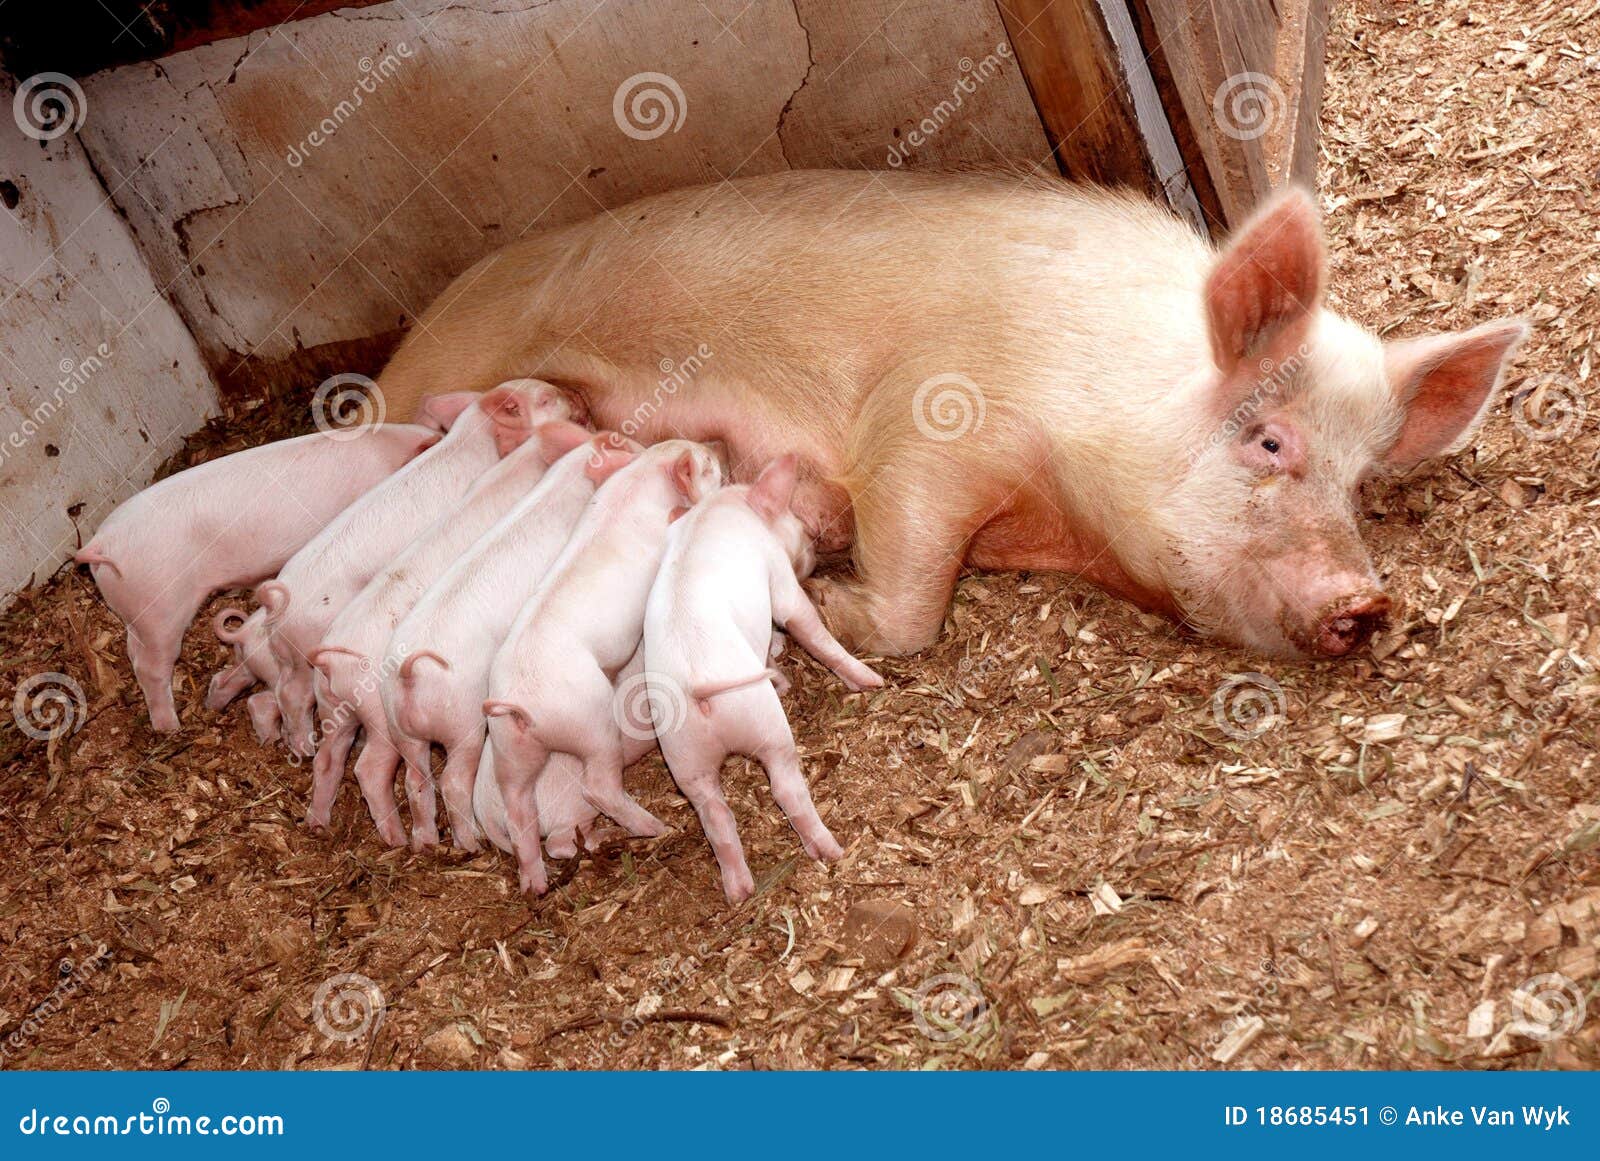 mother pig clipart - photo #42